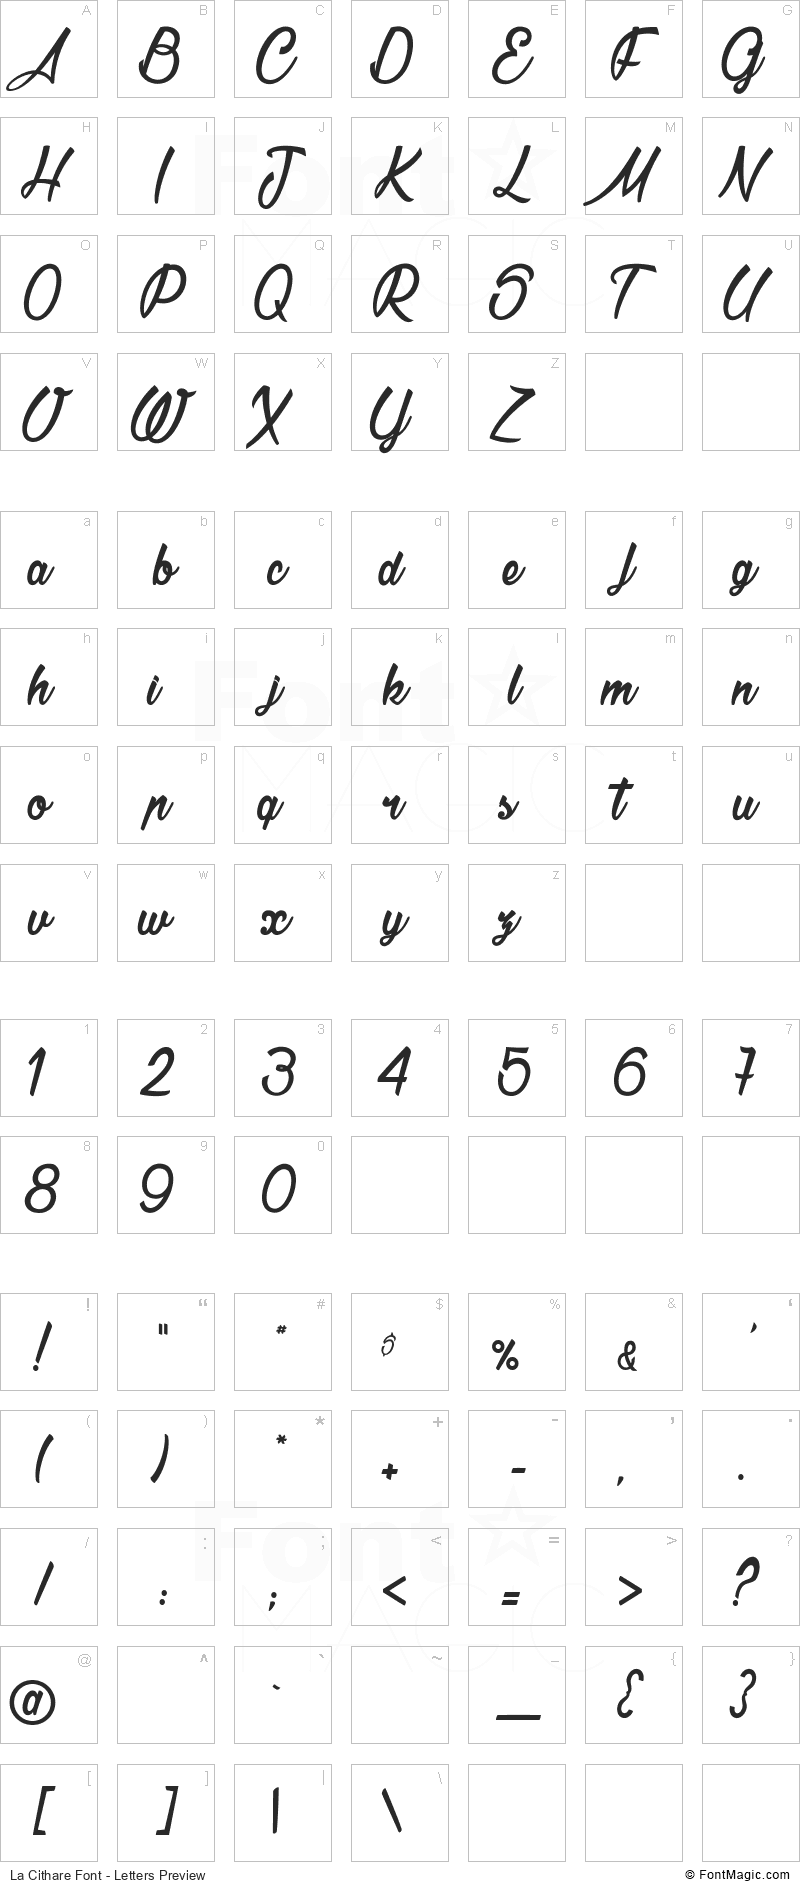 La Cithare Font - All Latters Preview Chart